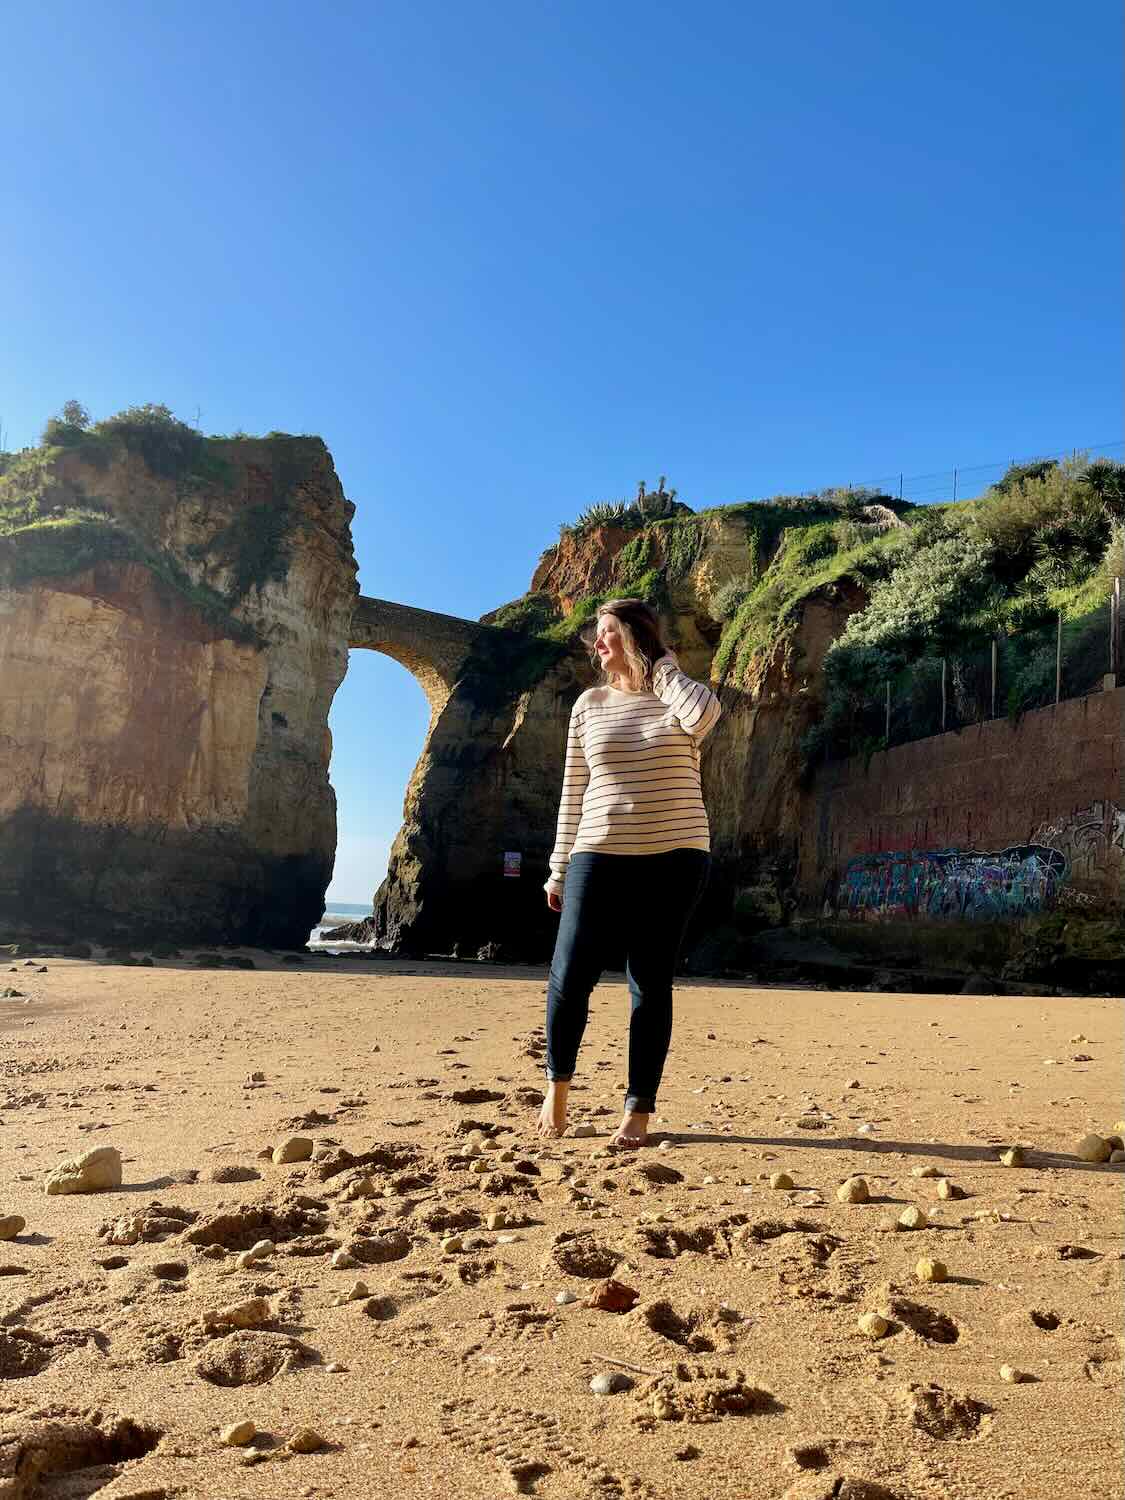 A woman stands barefoot on a sandy beach, with rocky cliffs and a stone arch bridge in the background. The sky is clear and blue, and there are scattered footprints and rocks on the sand